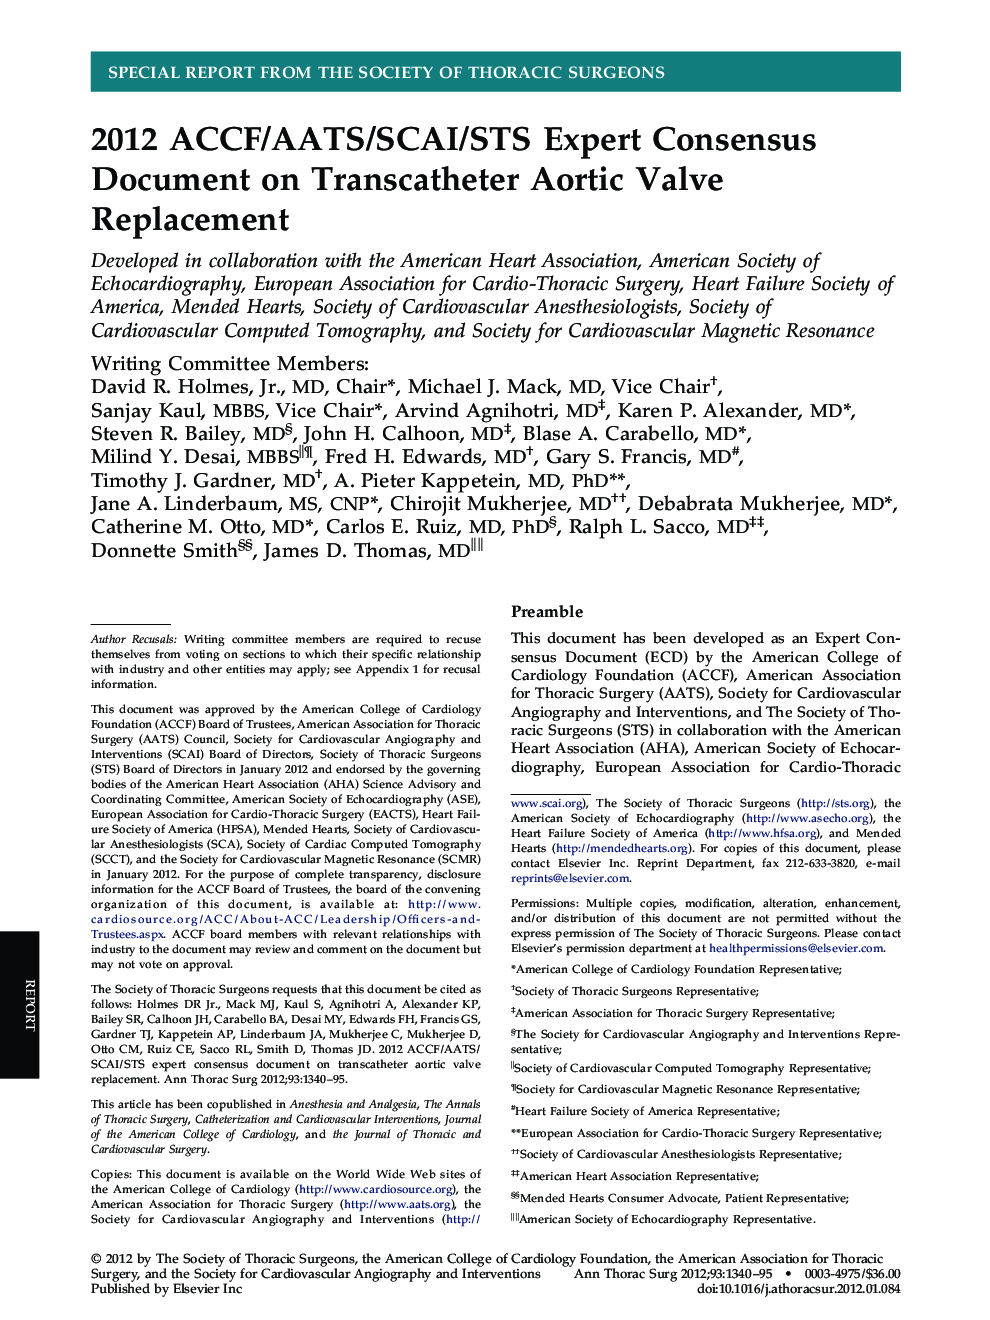 2012 ACCF/AATS/SCAI/STS Expert Consensus Document on Transcatheter Aortic Valve Replacement